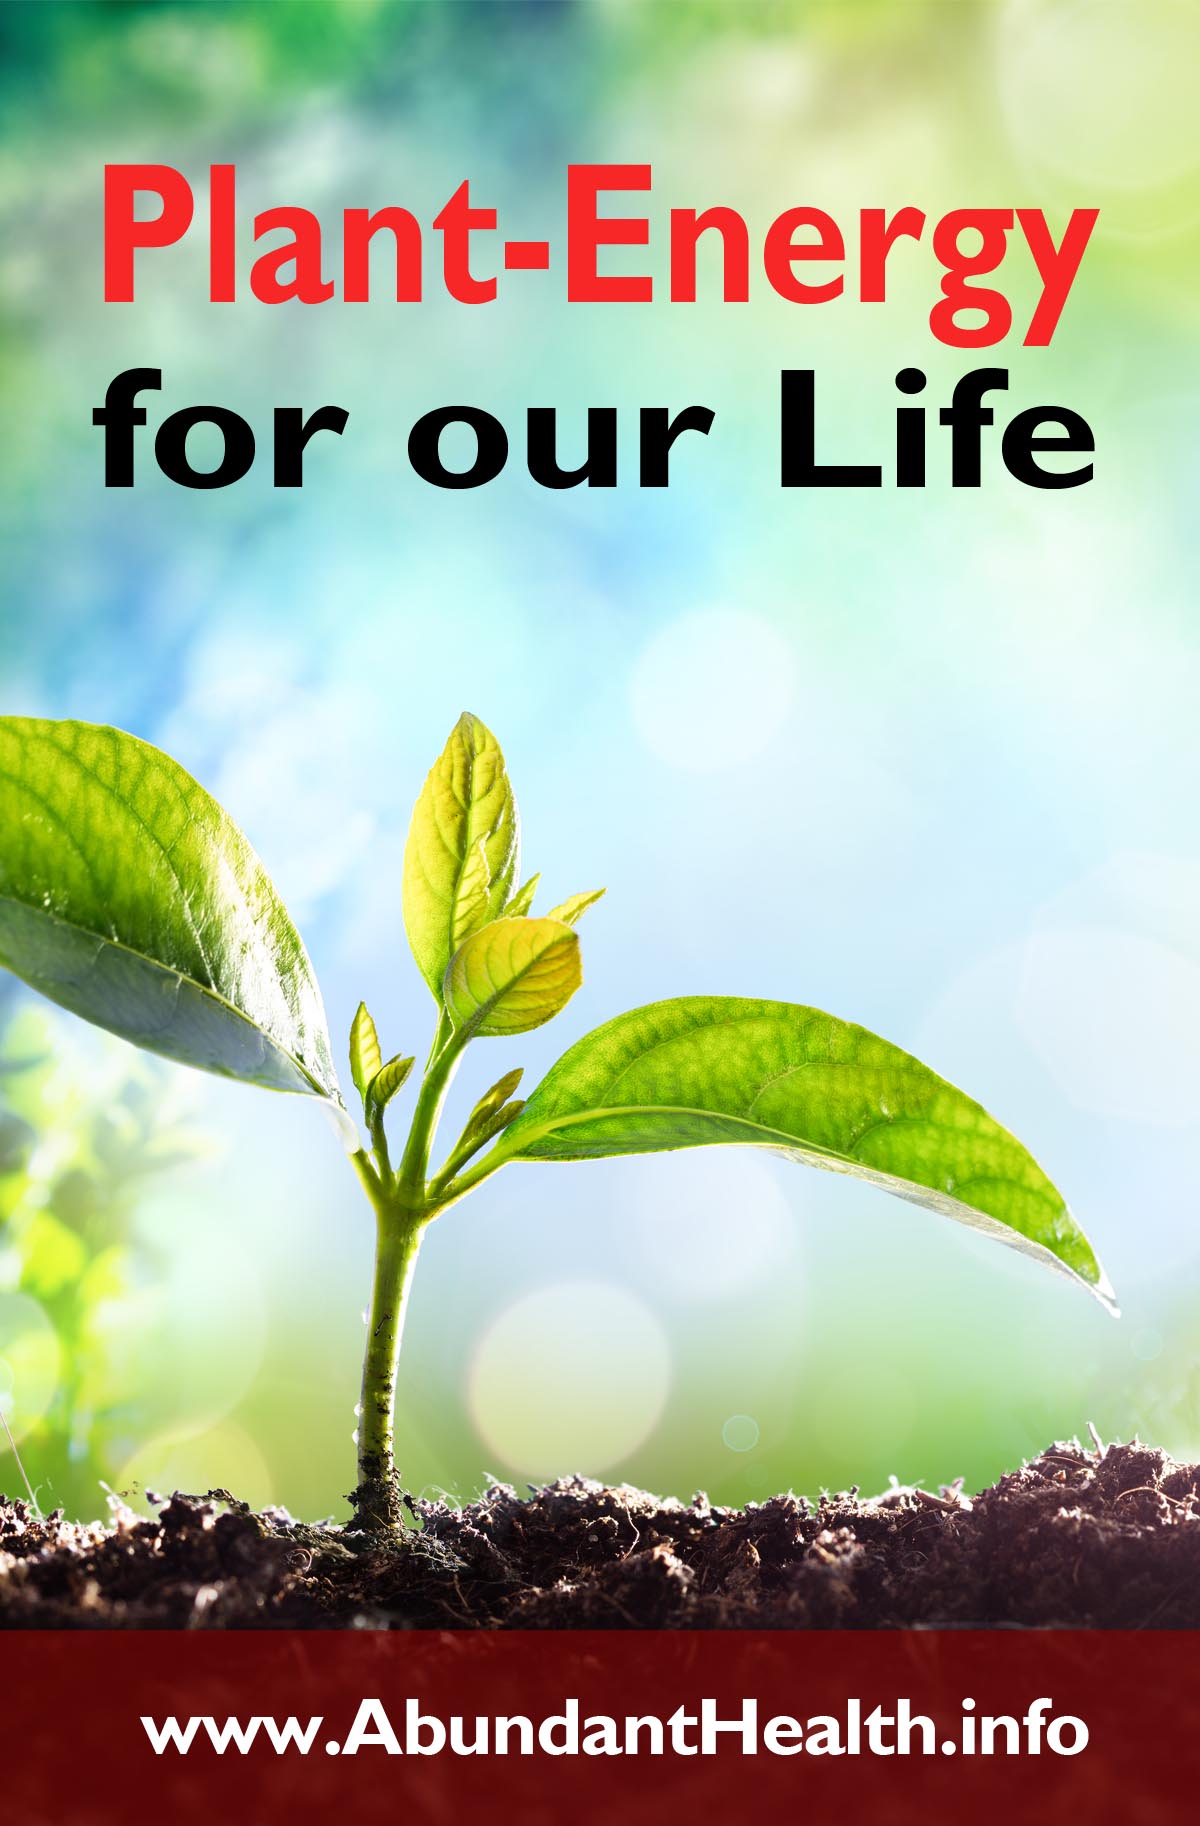 Plant-Energy for our Life